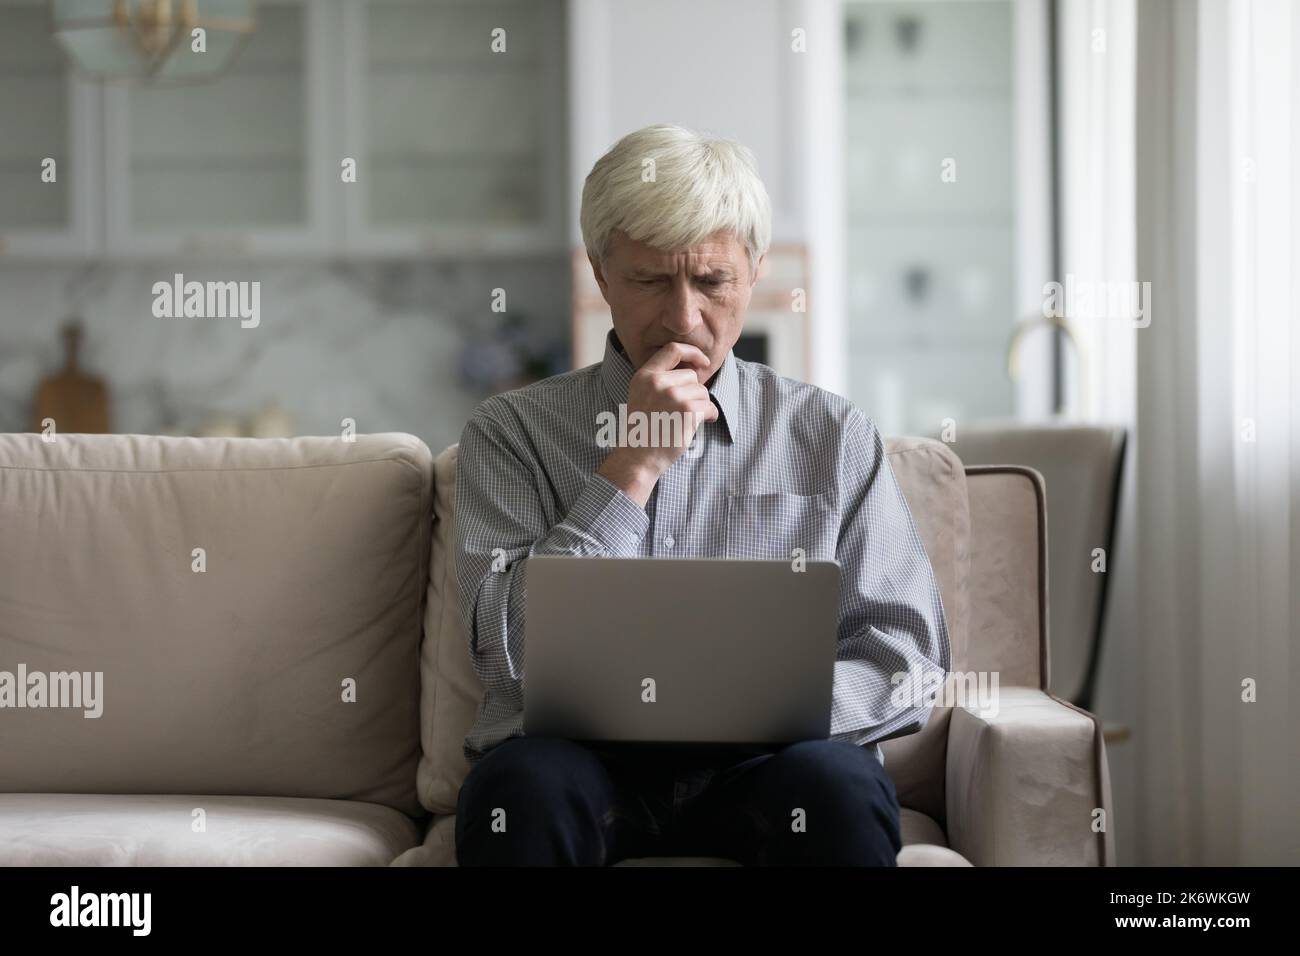 Frown older man sit on sofa with laptop Stock Photo